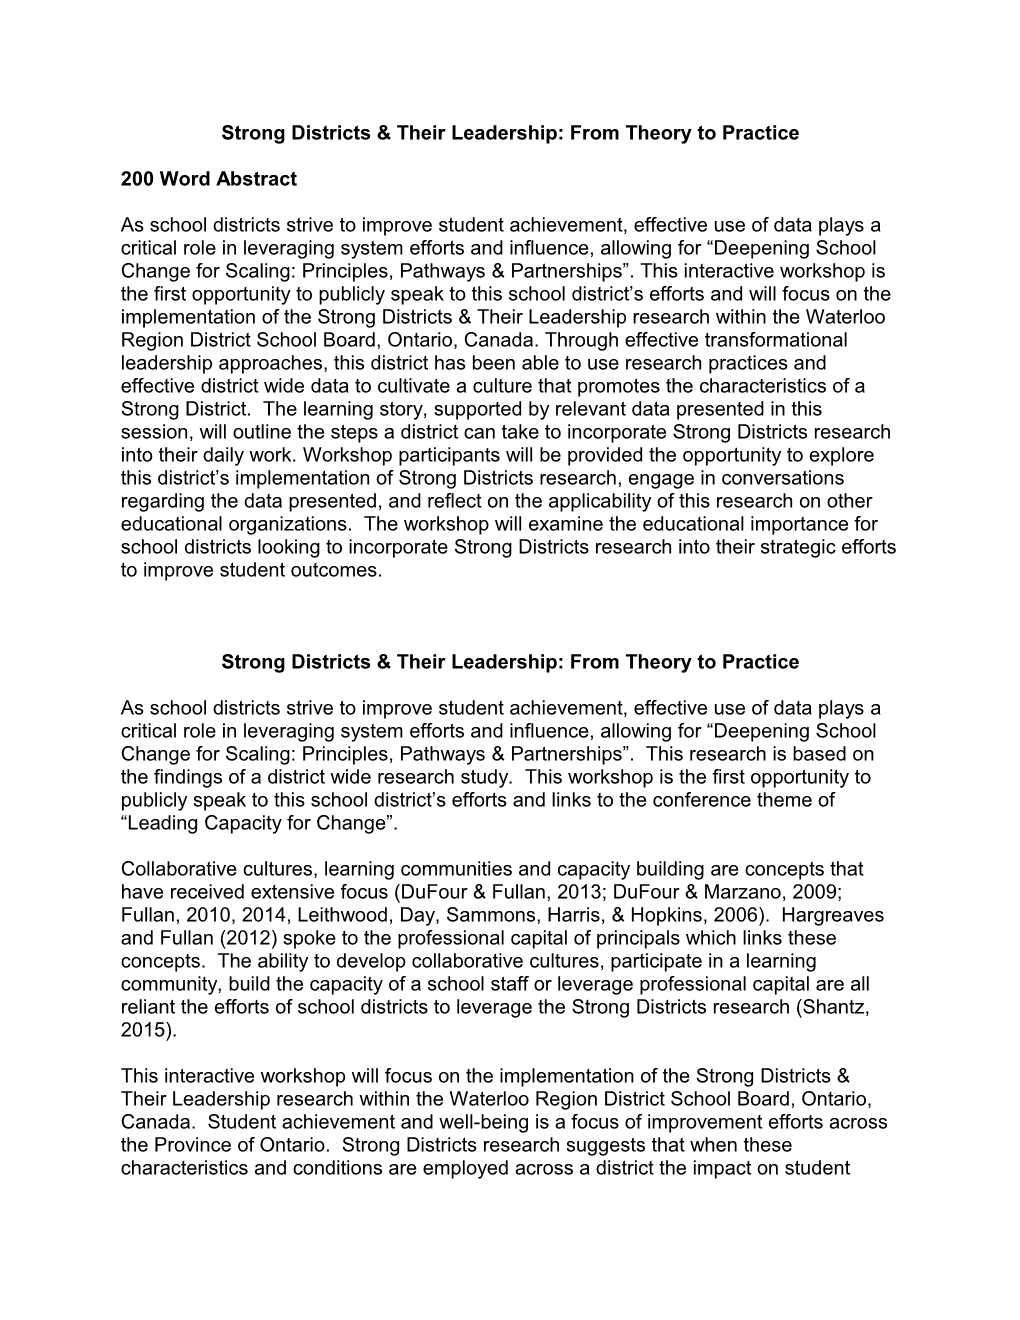 Strong Districts & Their Leadership: from Theory to Practice